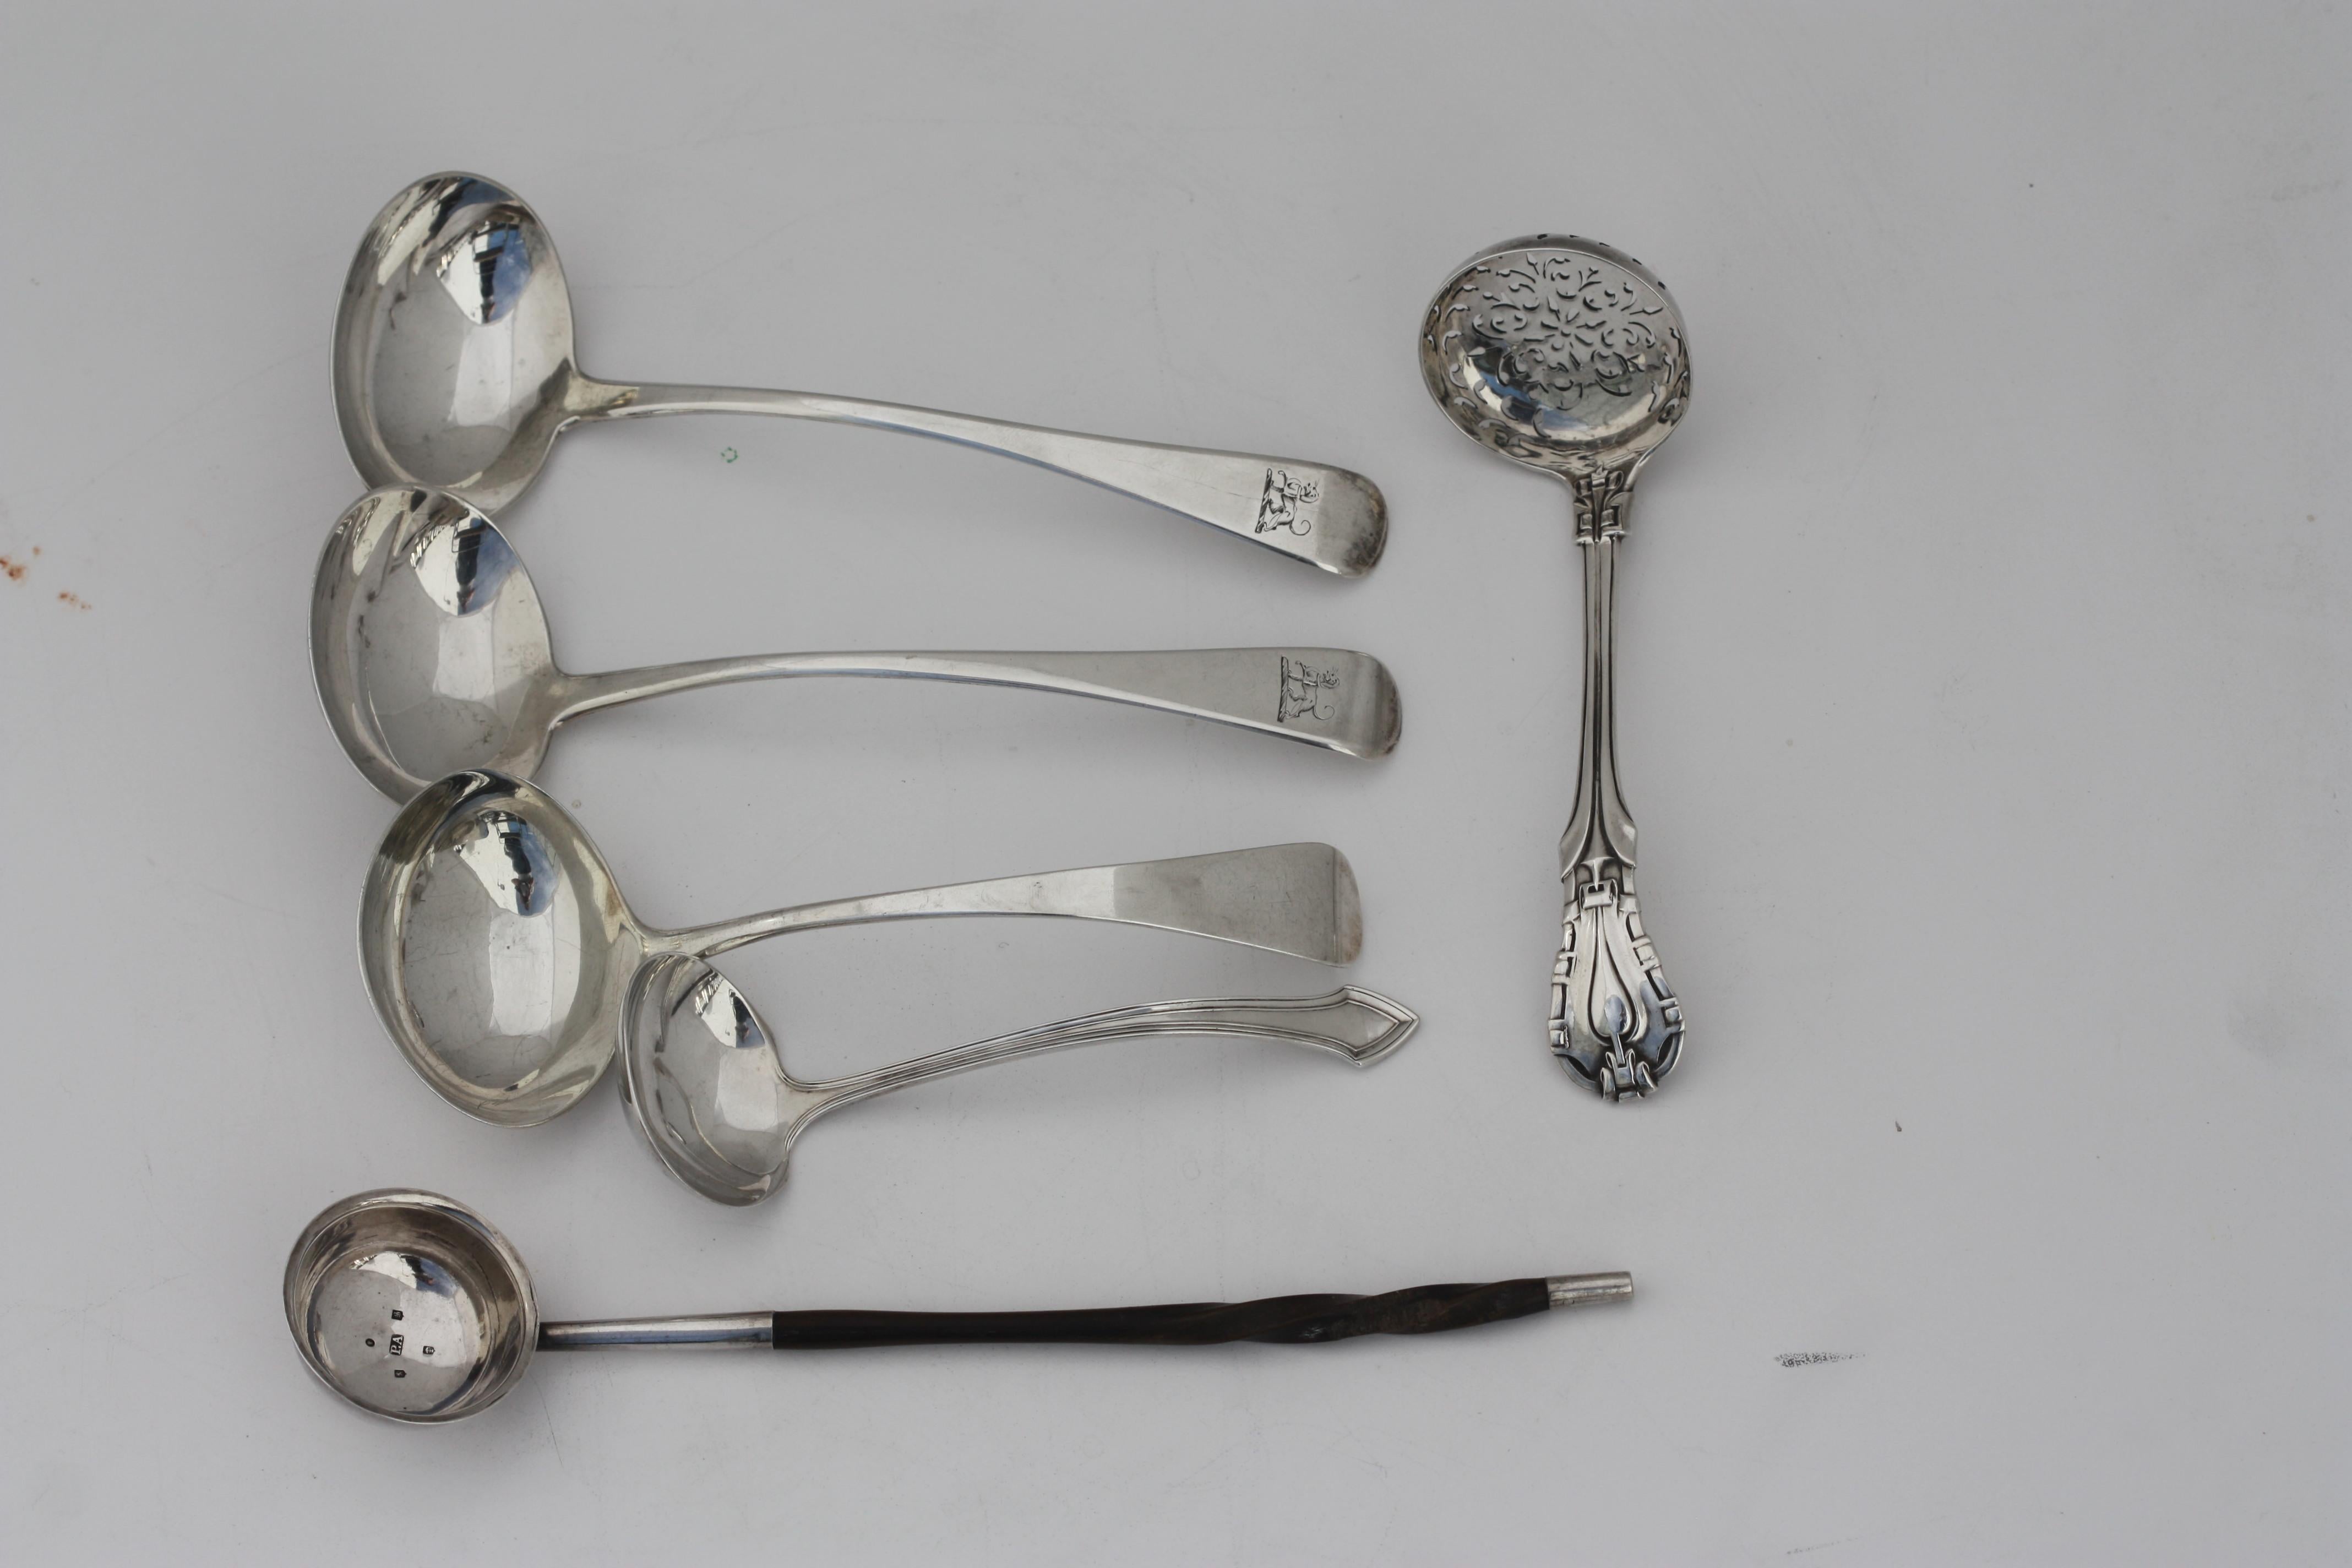 
Six Various Silver Ladles
Comprising, a small American sterling ladle, J.E. Caldwell & Co., with thread borders, a Victorian straining ladle, London, third quarter 19th century, a pair of George III ladles, London, circa 1814, maker GT for George